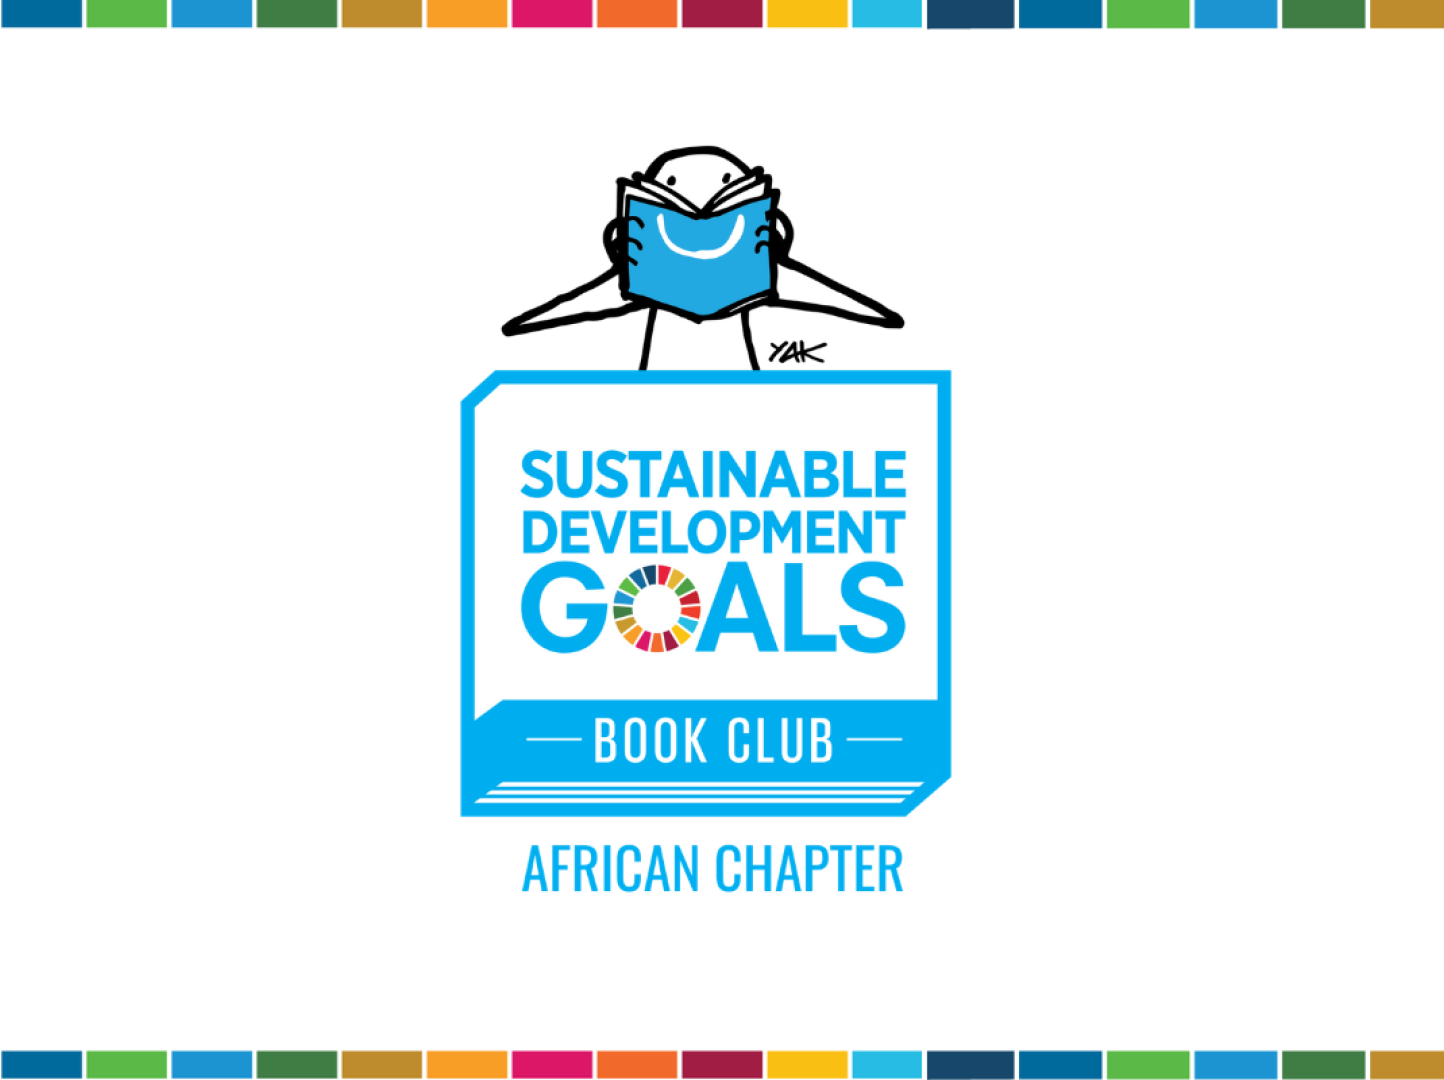 SDG BOOK CLUB AFRICAN CHAPTER